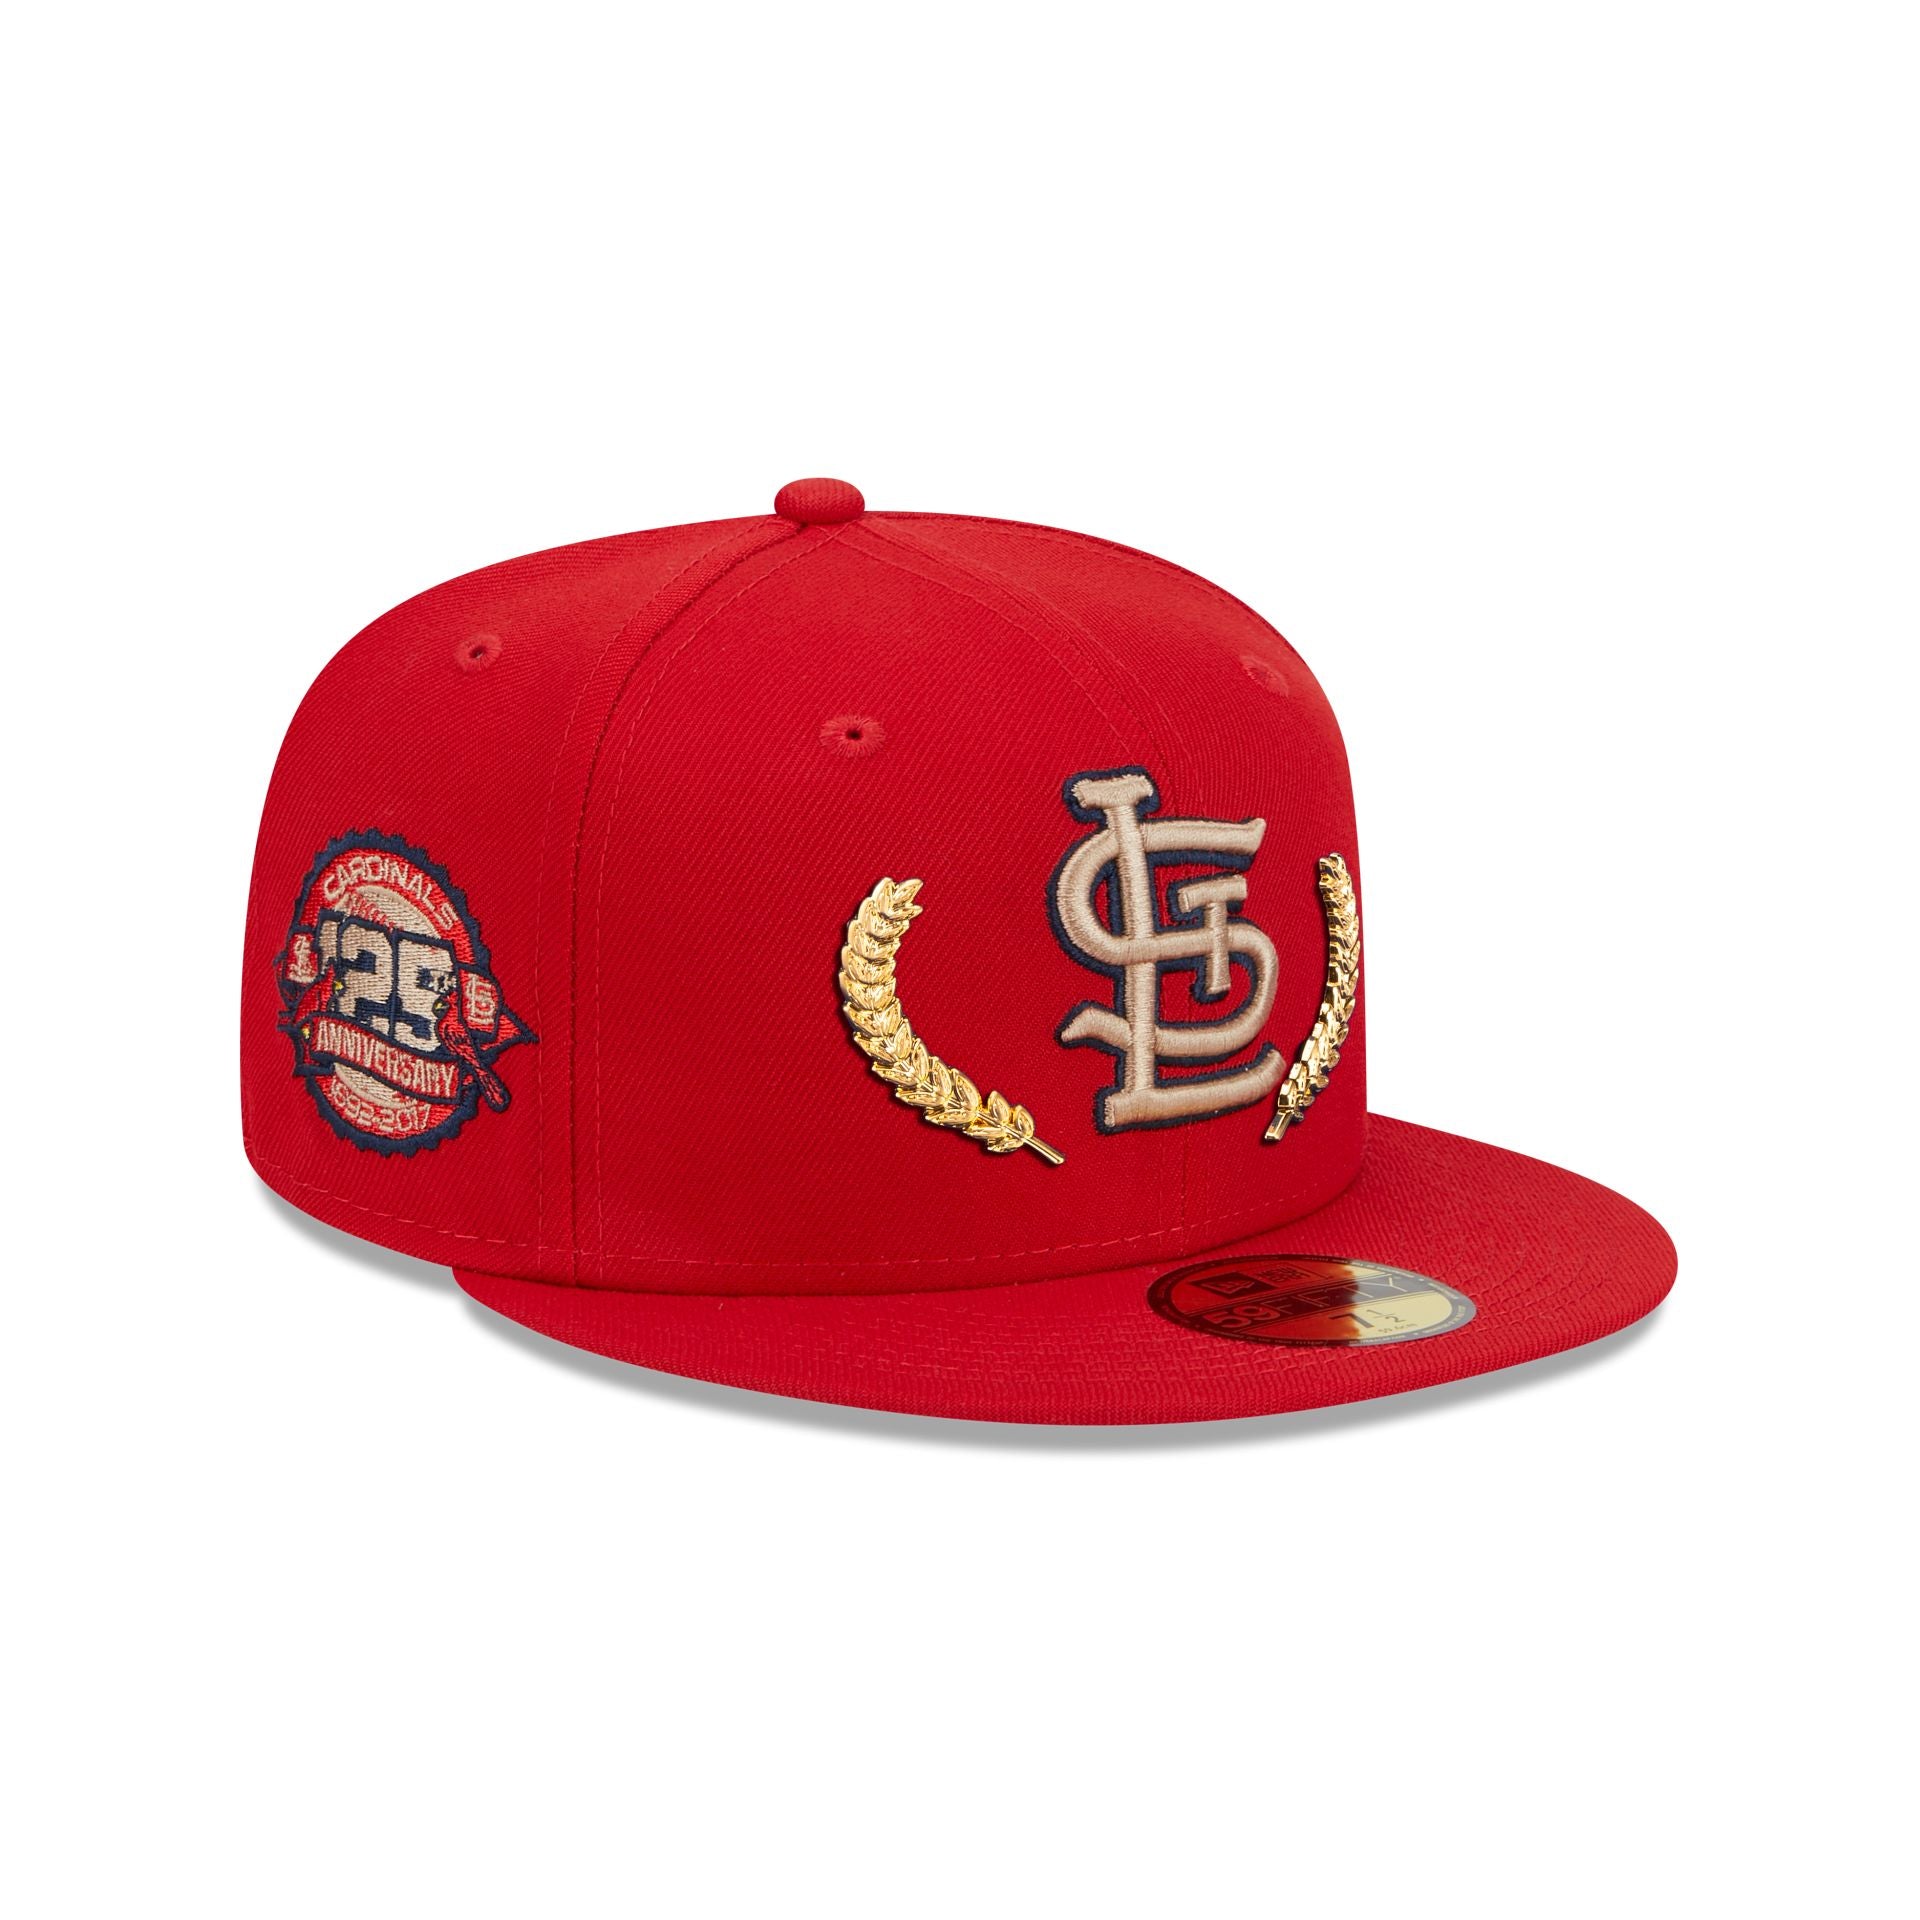 St. Louis Cardinals Gold Leaf 59FIFTY Fitted Hat, Red - Size: 7 1/2, MLB by New Era